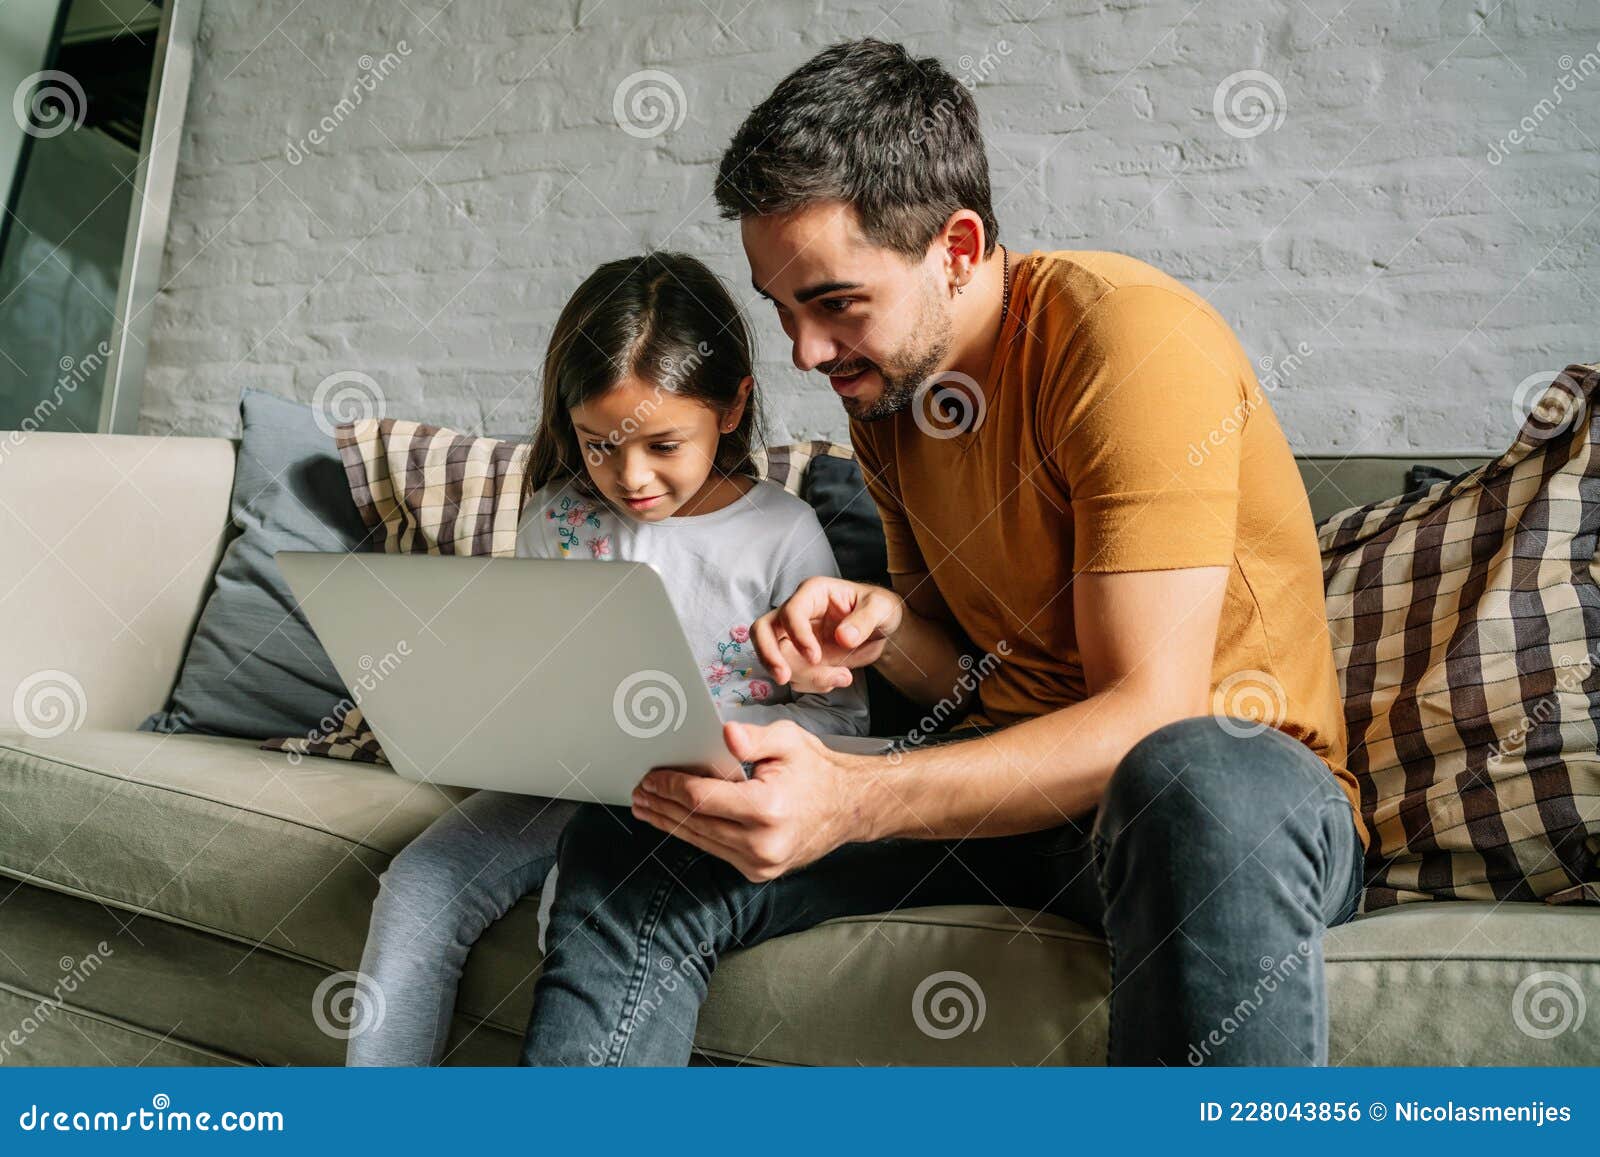 little girl and her father using a laptop together at home.